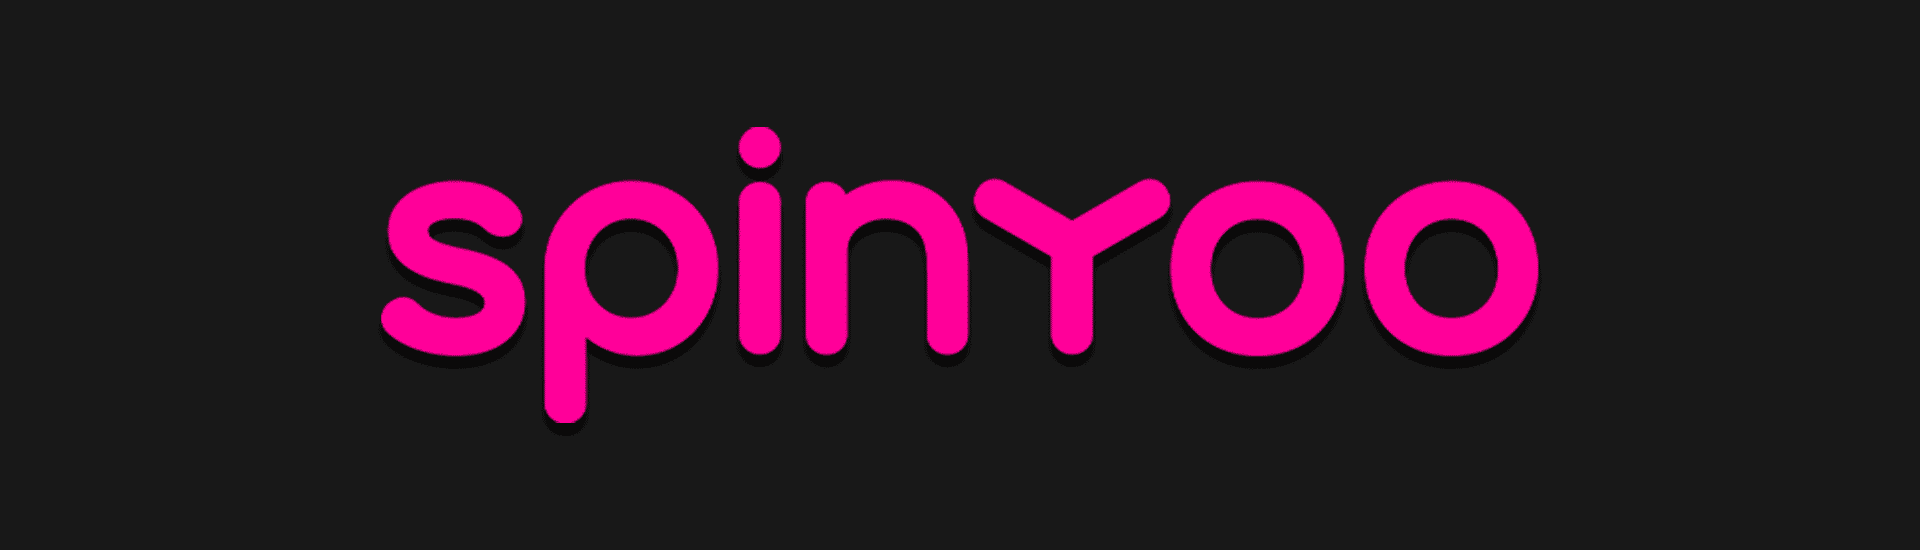 SpinYoo Featured Image